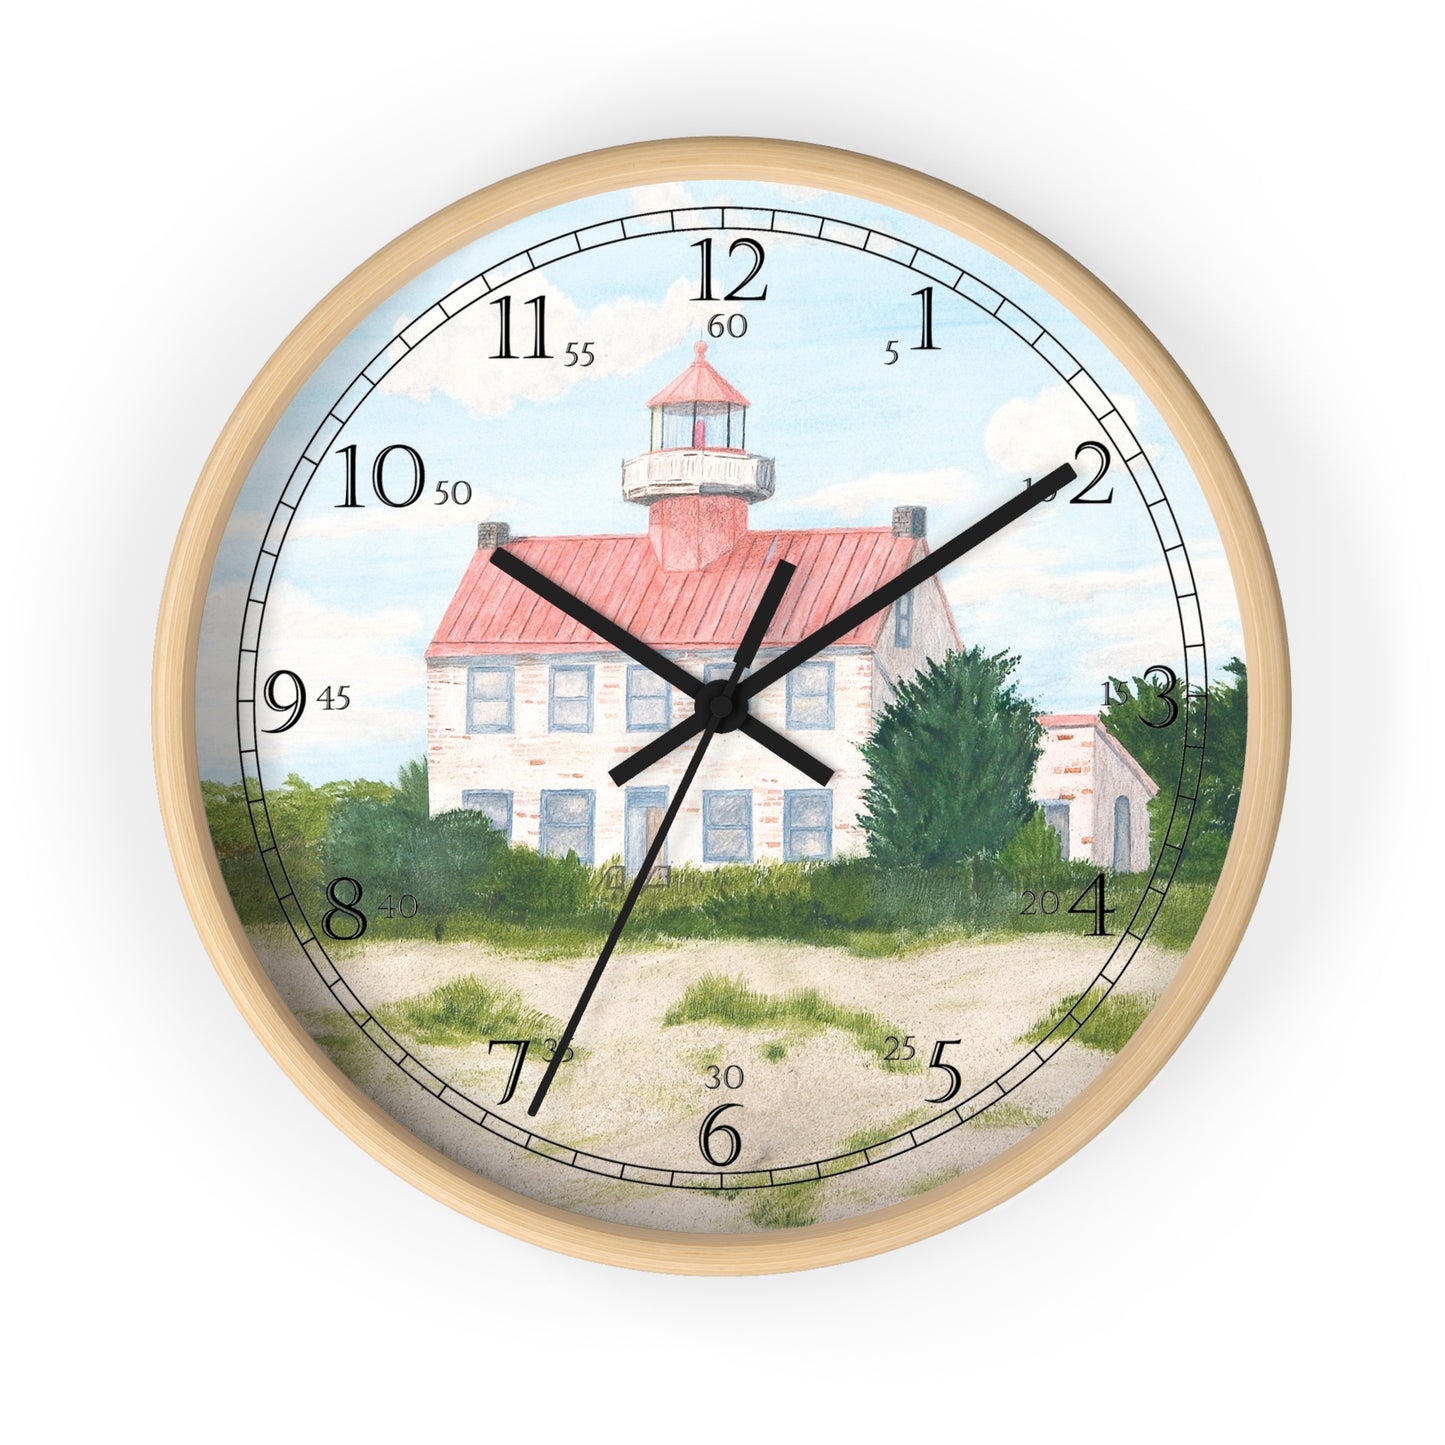 Enjoy a piece of New Jersey History as you look at the time on this charming clock. The East Point Lighthouse marks the entrance to the Maurice River from the Delaware Bay.